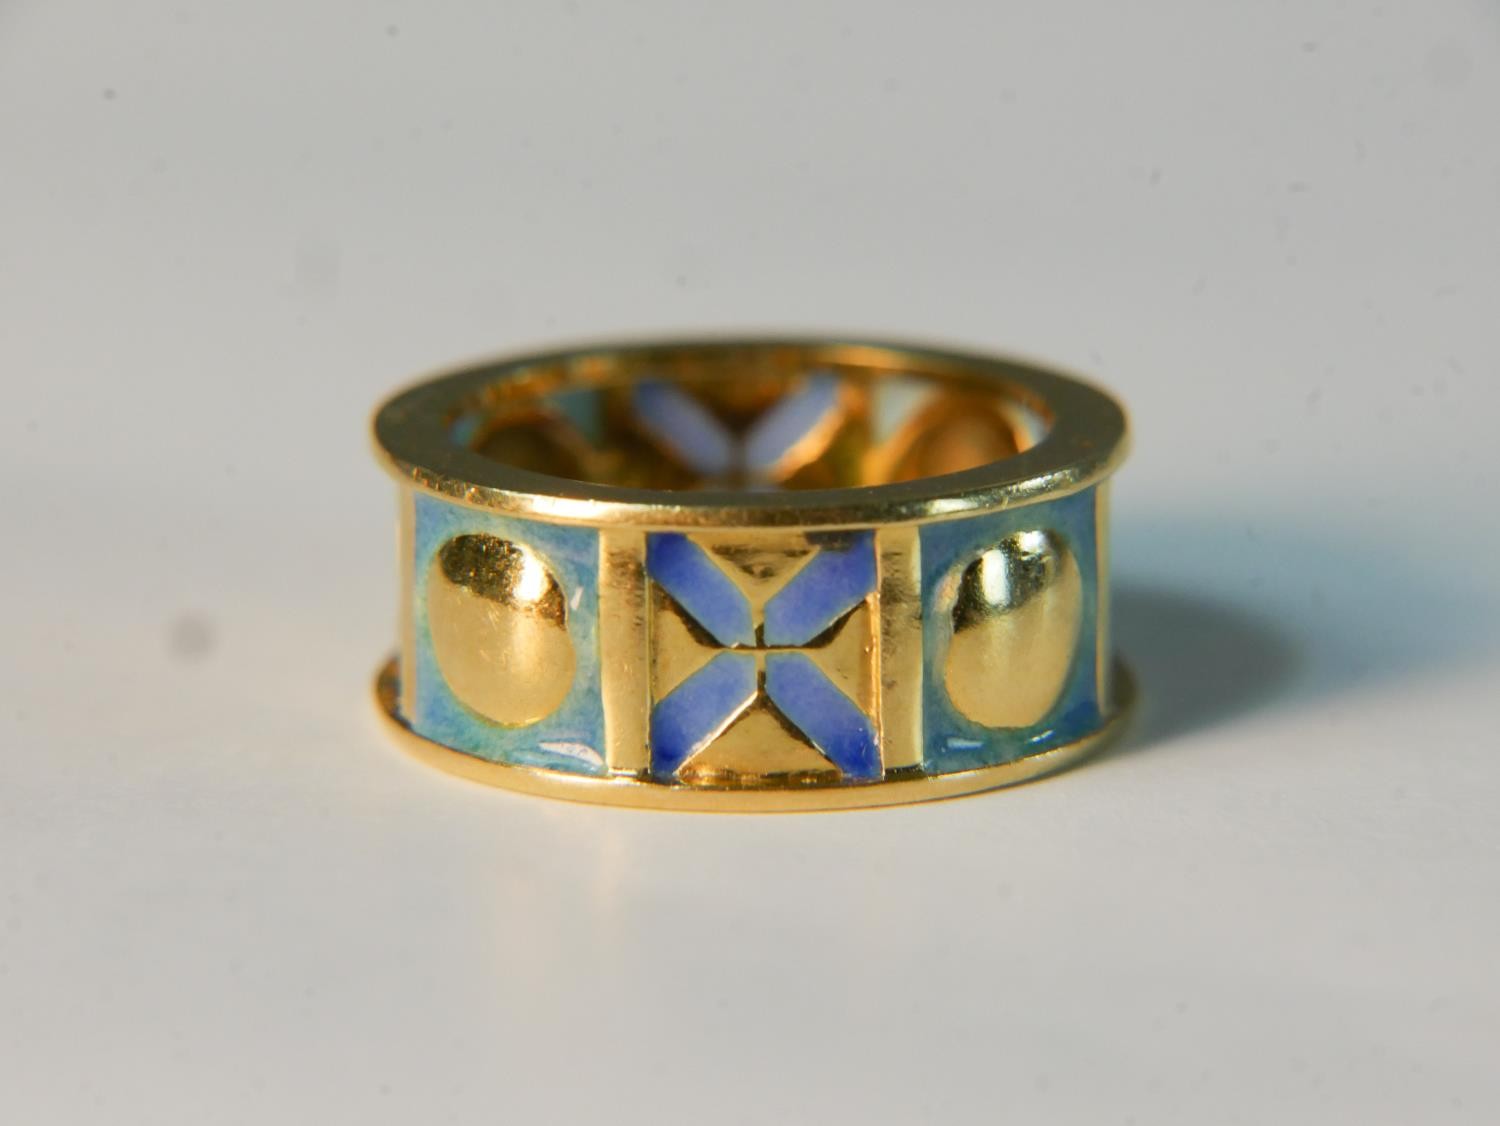 A contemporary 18 carat yellow gold and enamel sectioned XO design band. Stamped 750 and signed